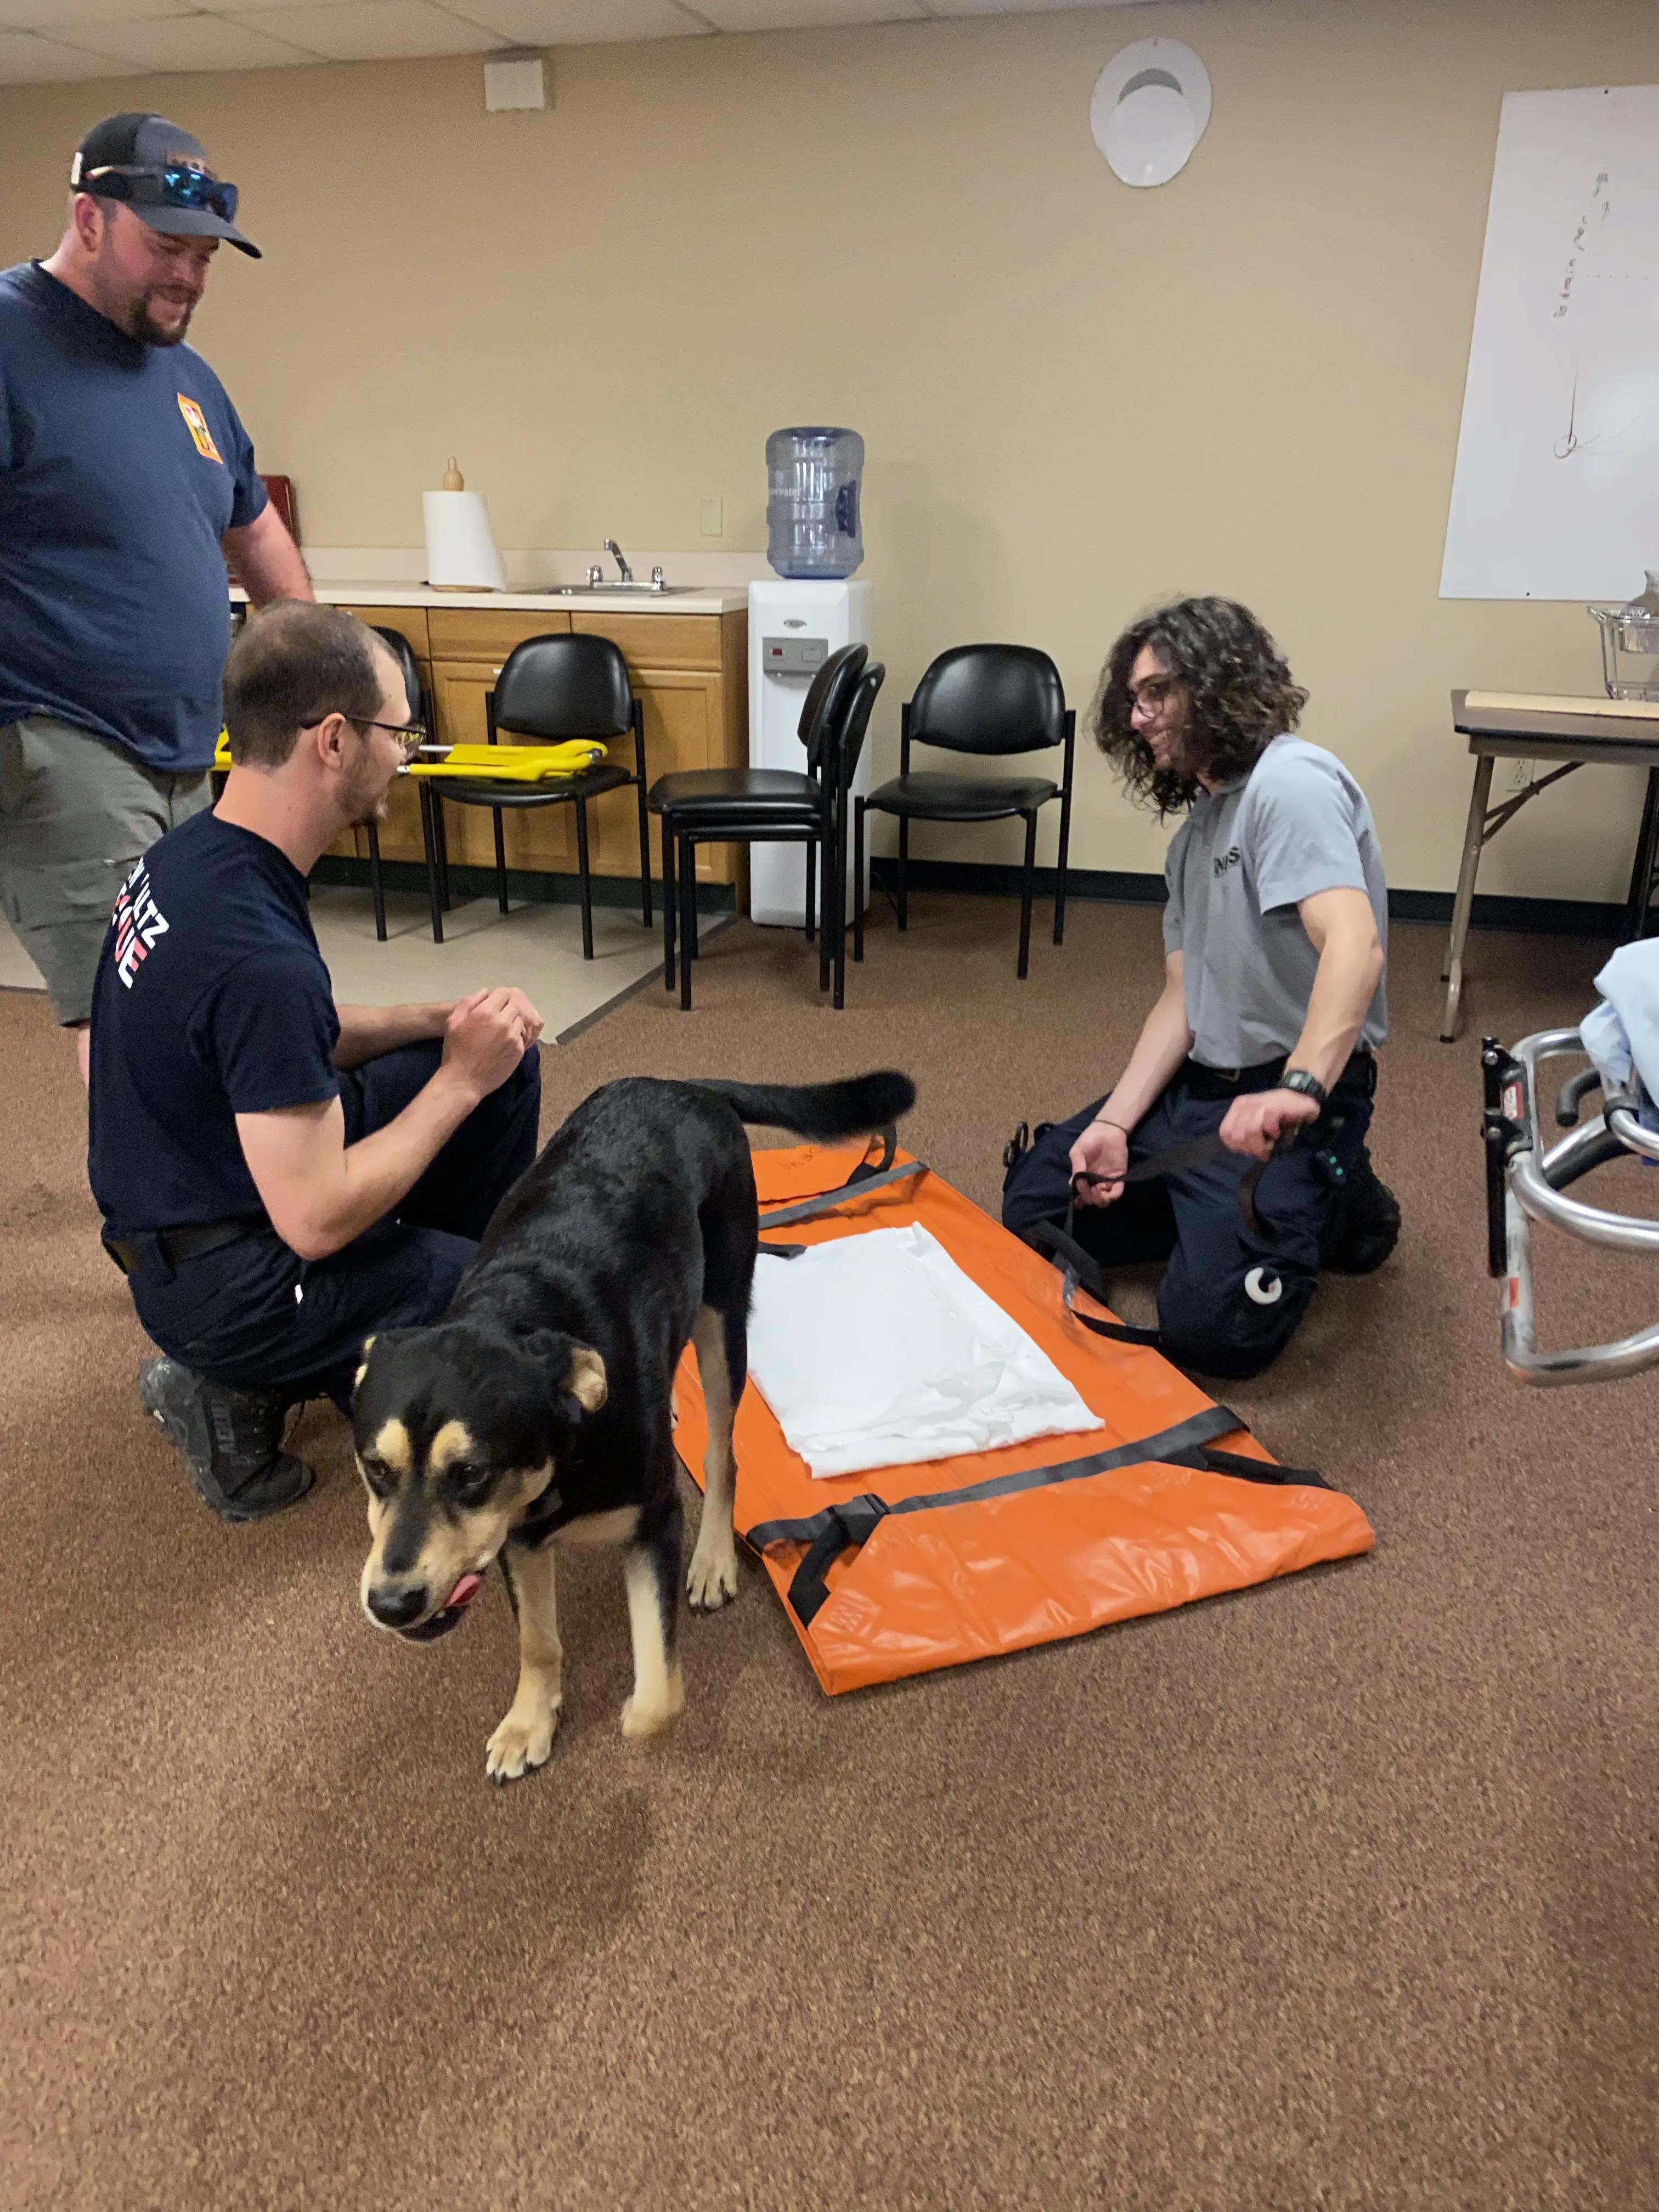 NPRS members and dog doing a training